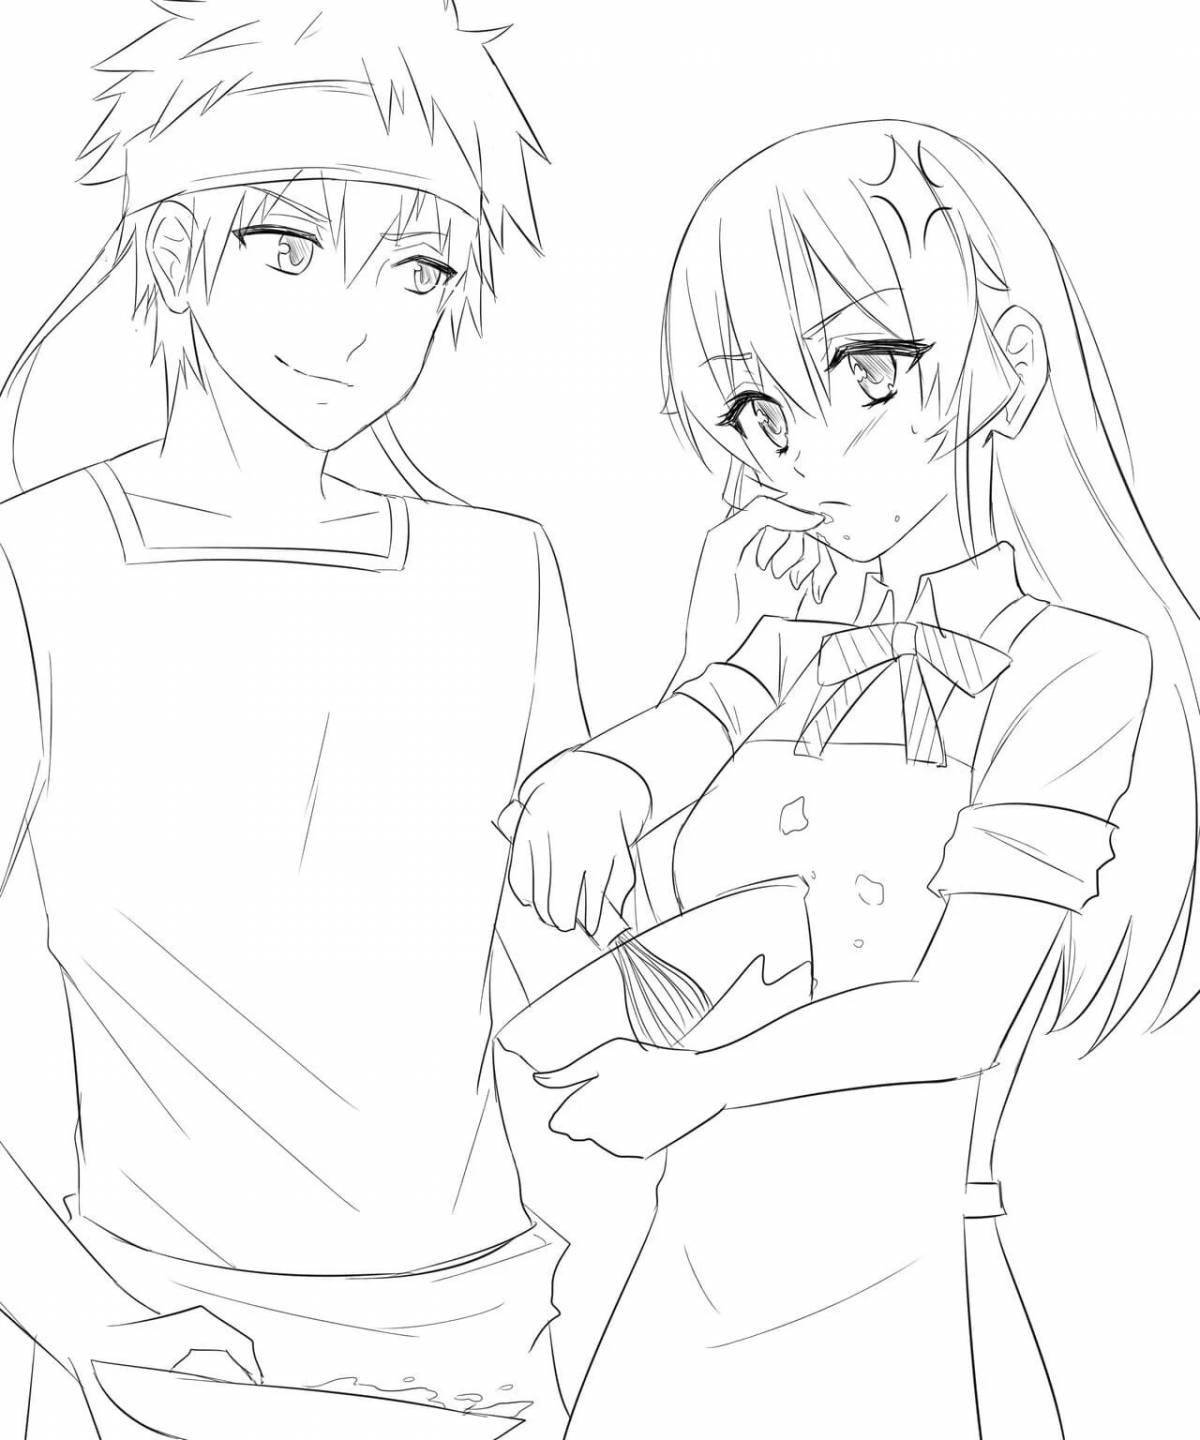 Bright anime boys and girls coloring pages